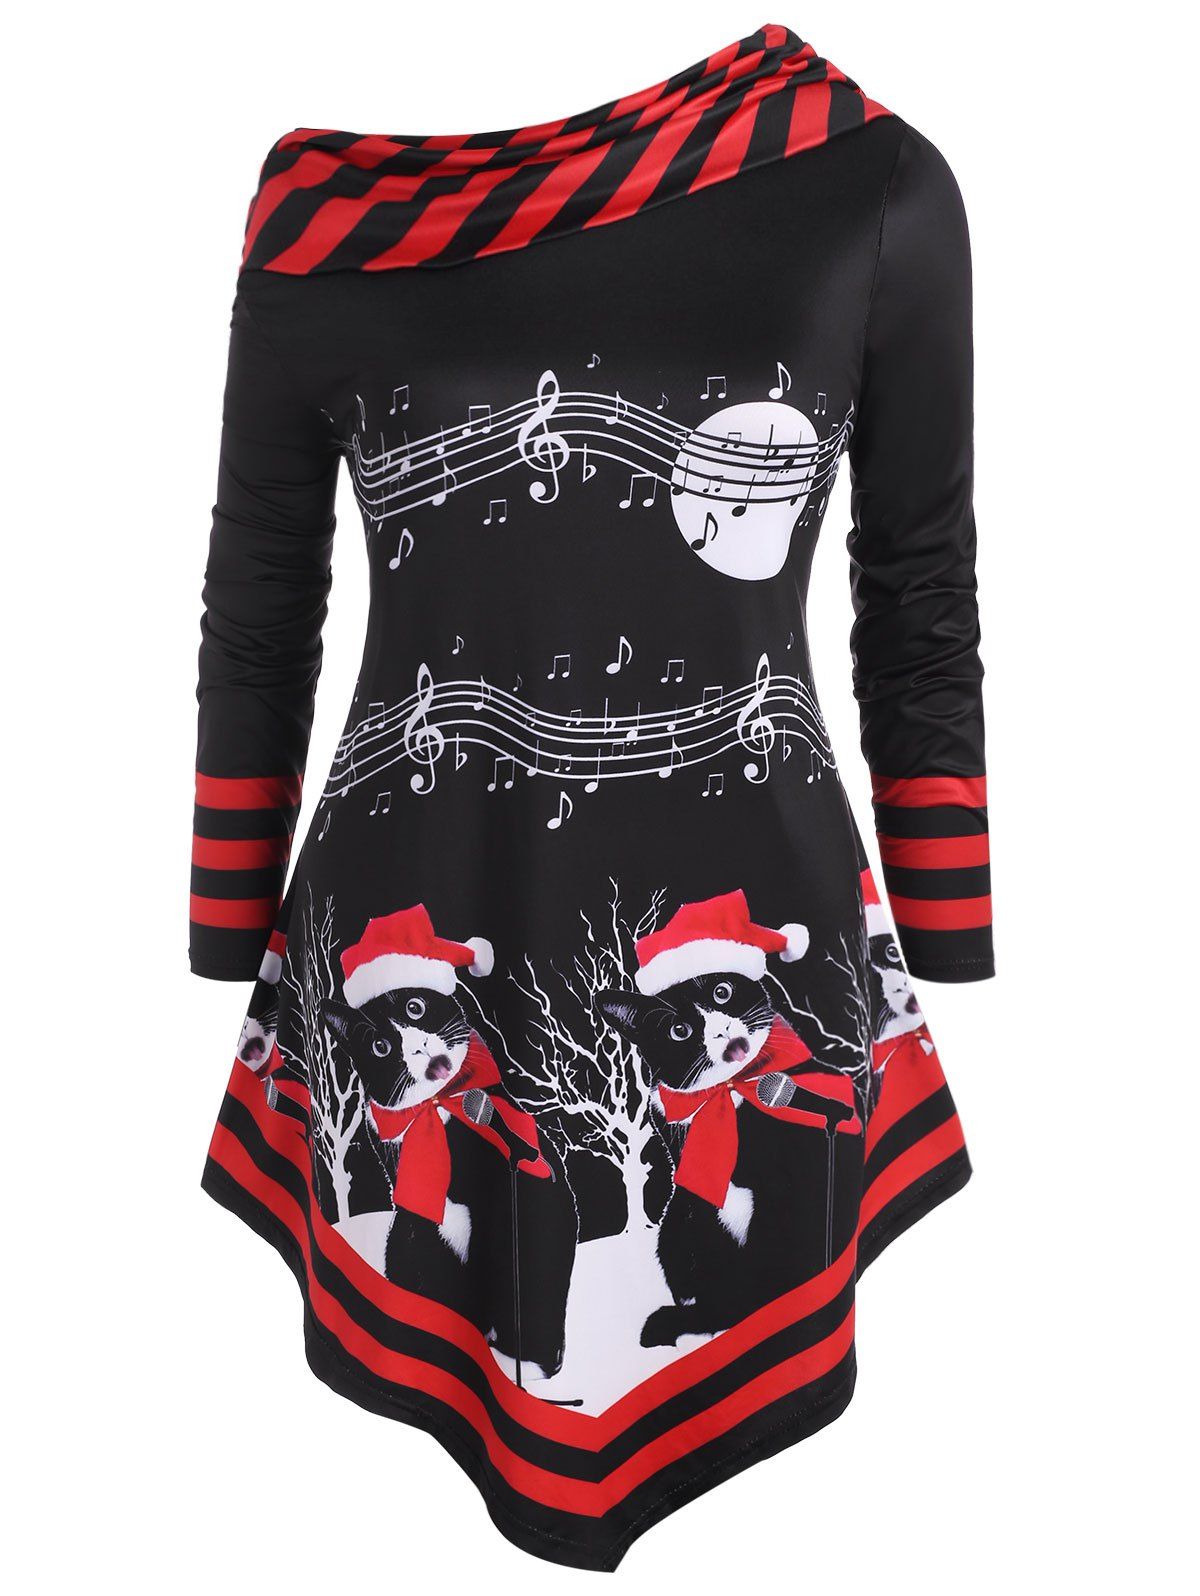 Christmas Cat Stripes Panel Musical Note Print Plus Size Top - RED 4X